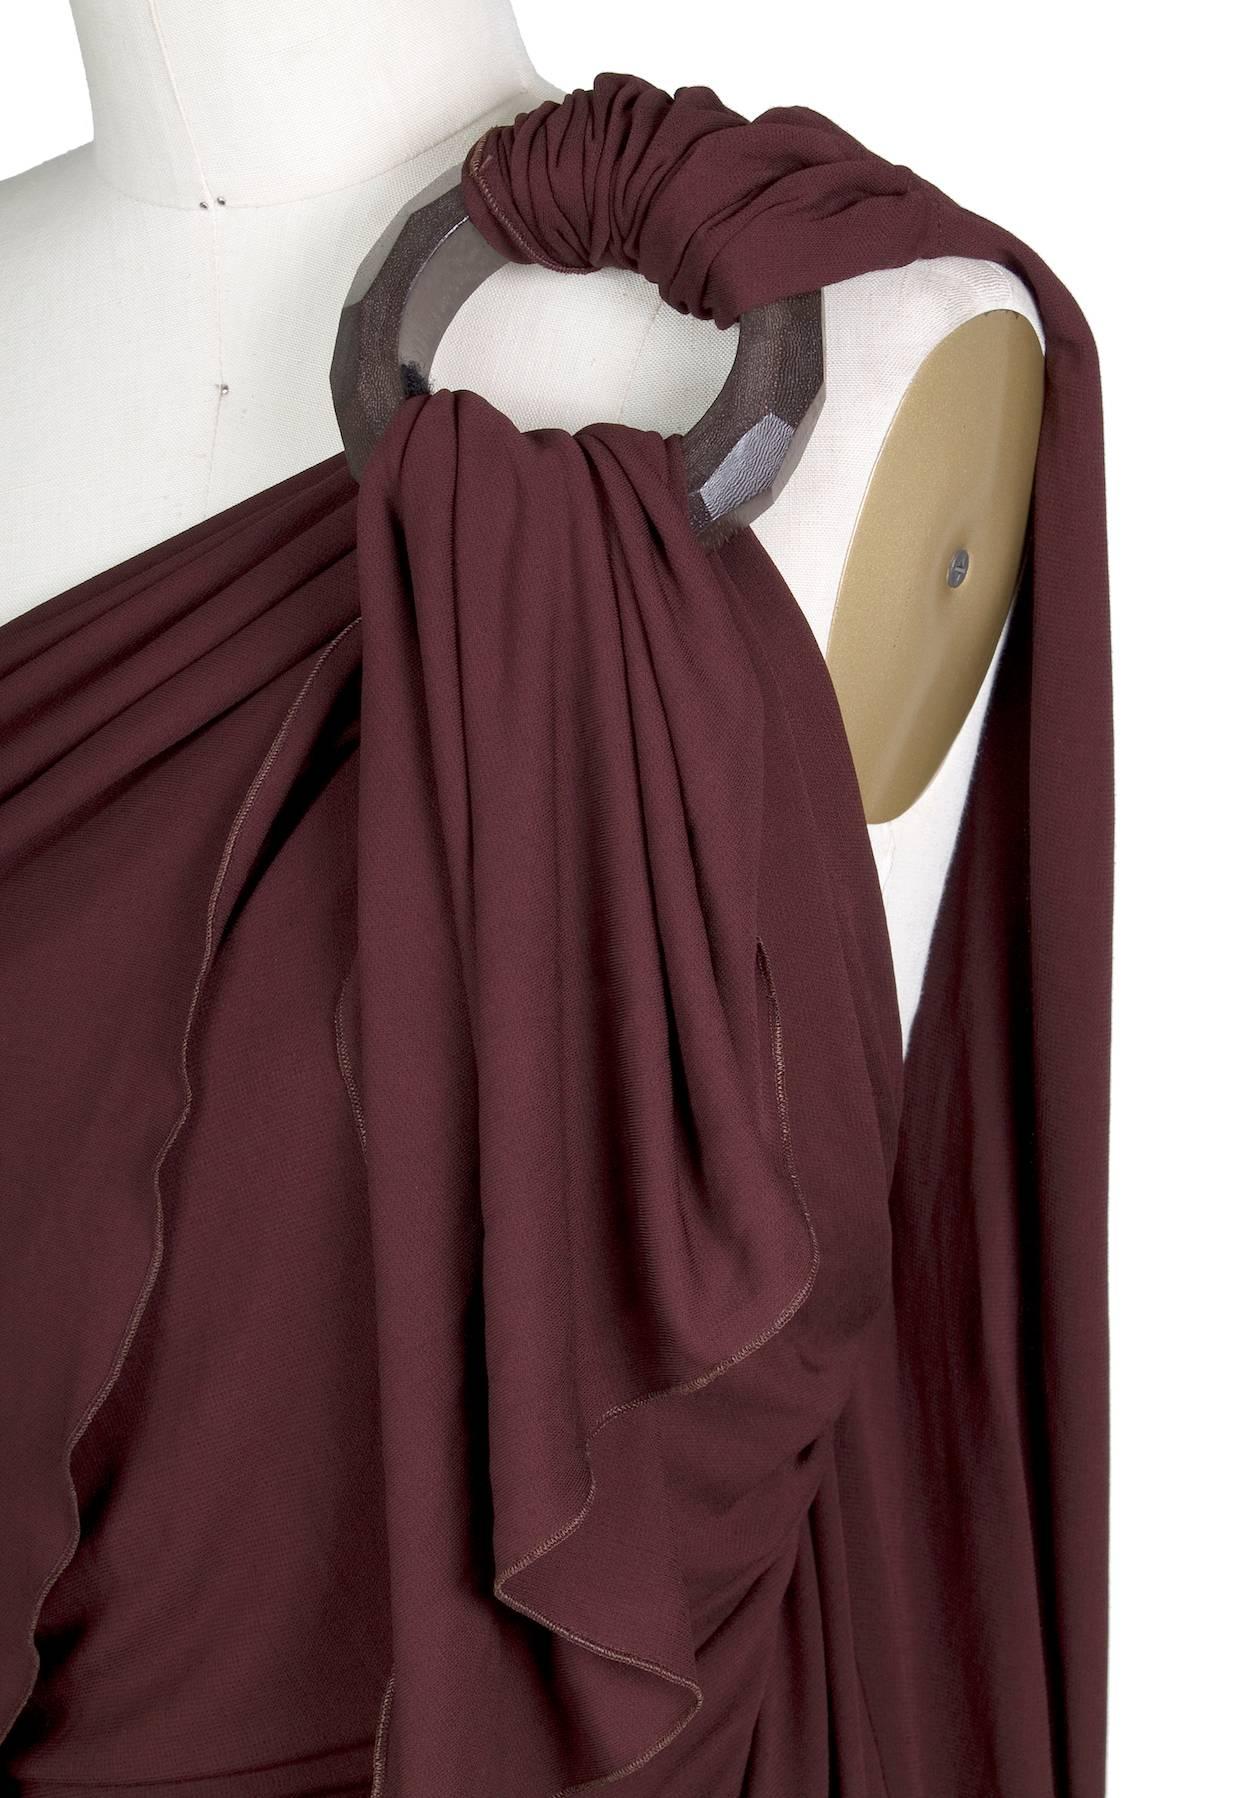 This is a dress by Jean Paul Gaultier c. 1990s.  It uses a wooden ring to loop and drape the dress.  

Please inquire for measurements. Estimating the size is a US 6.